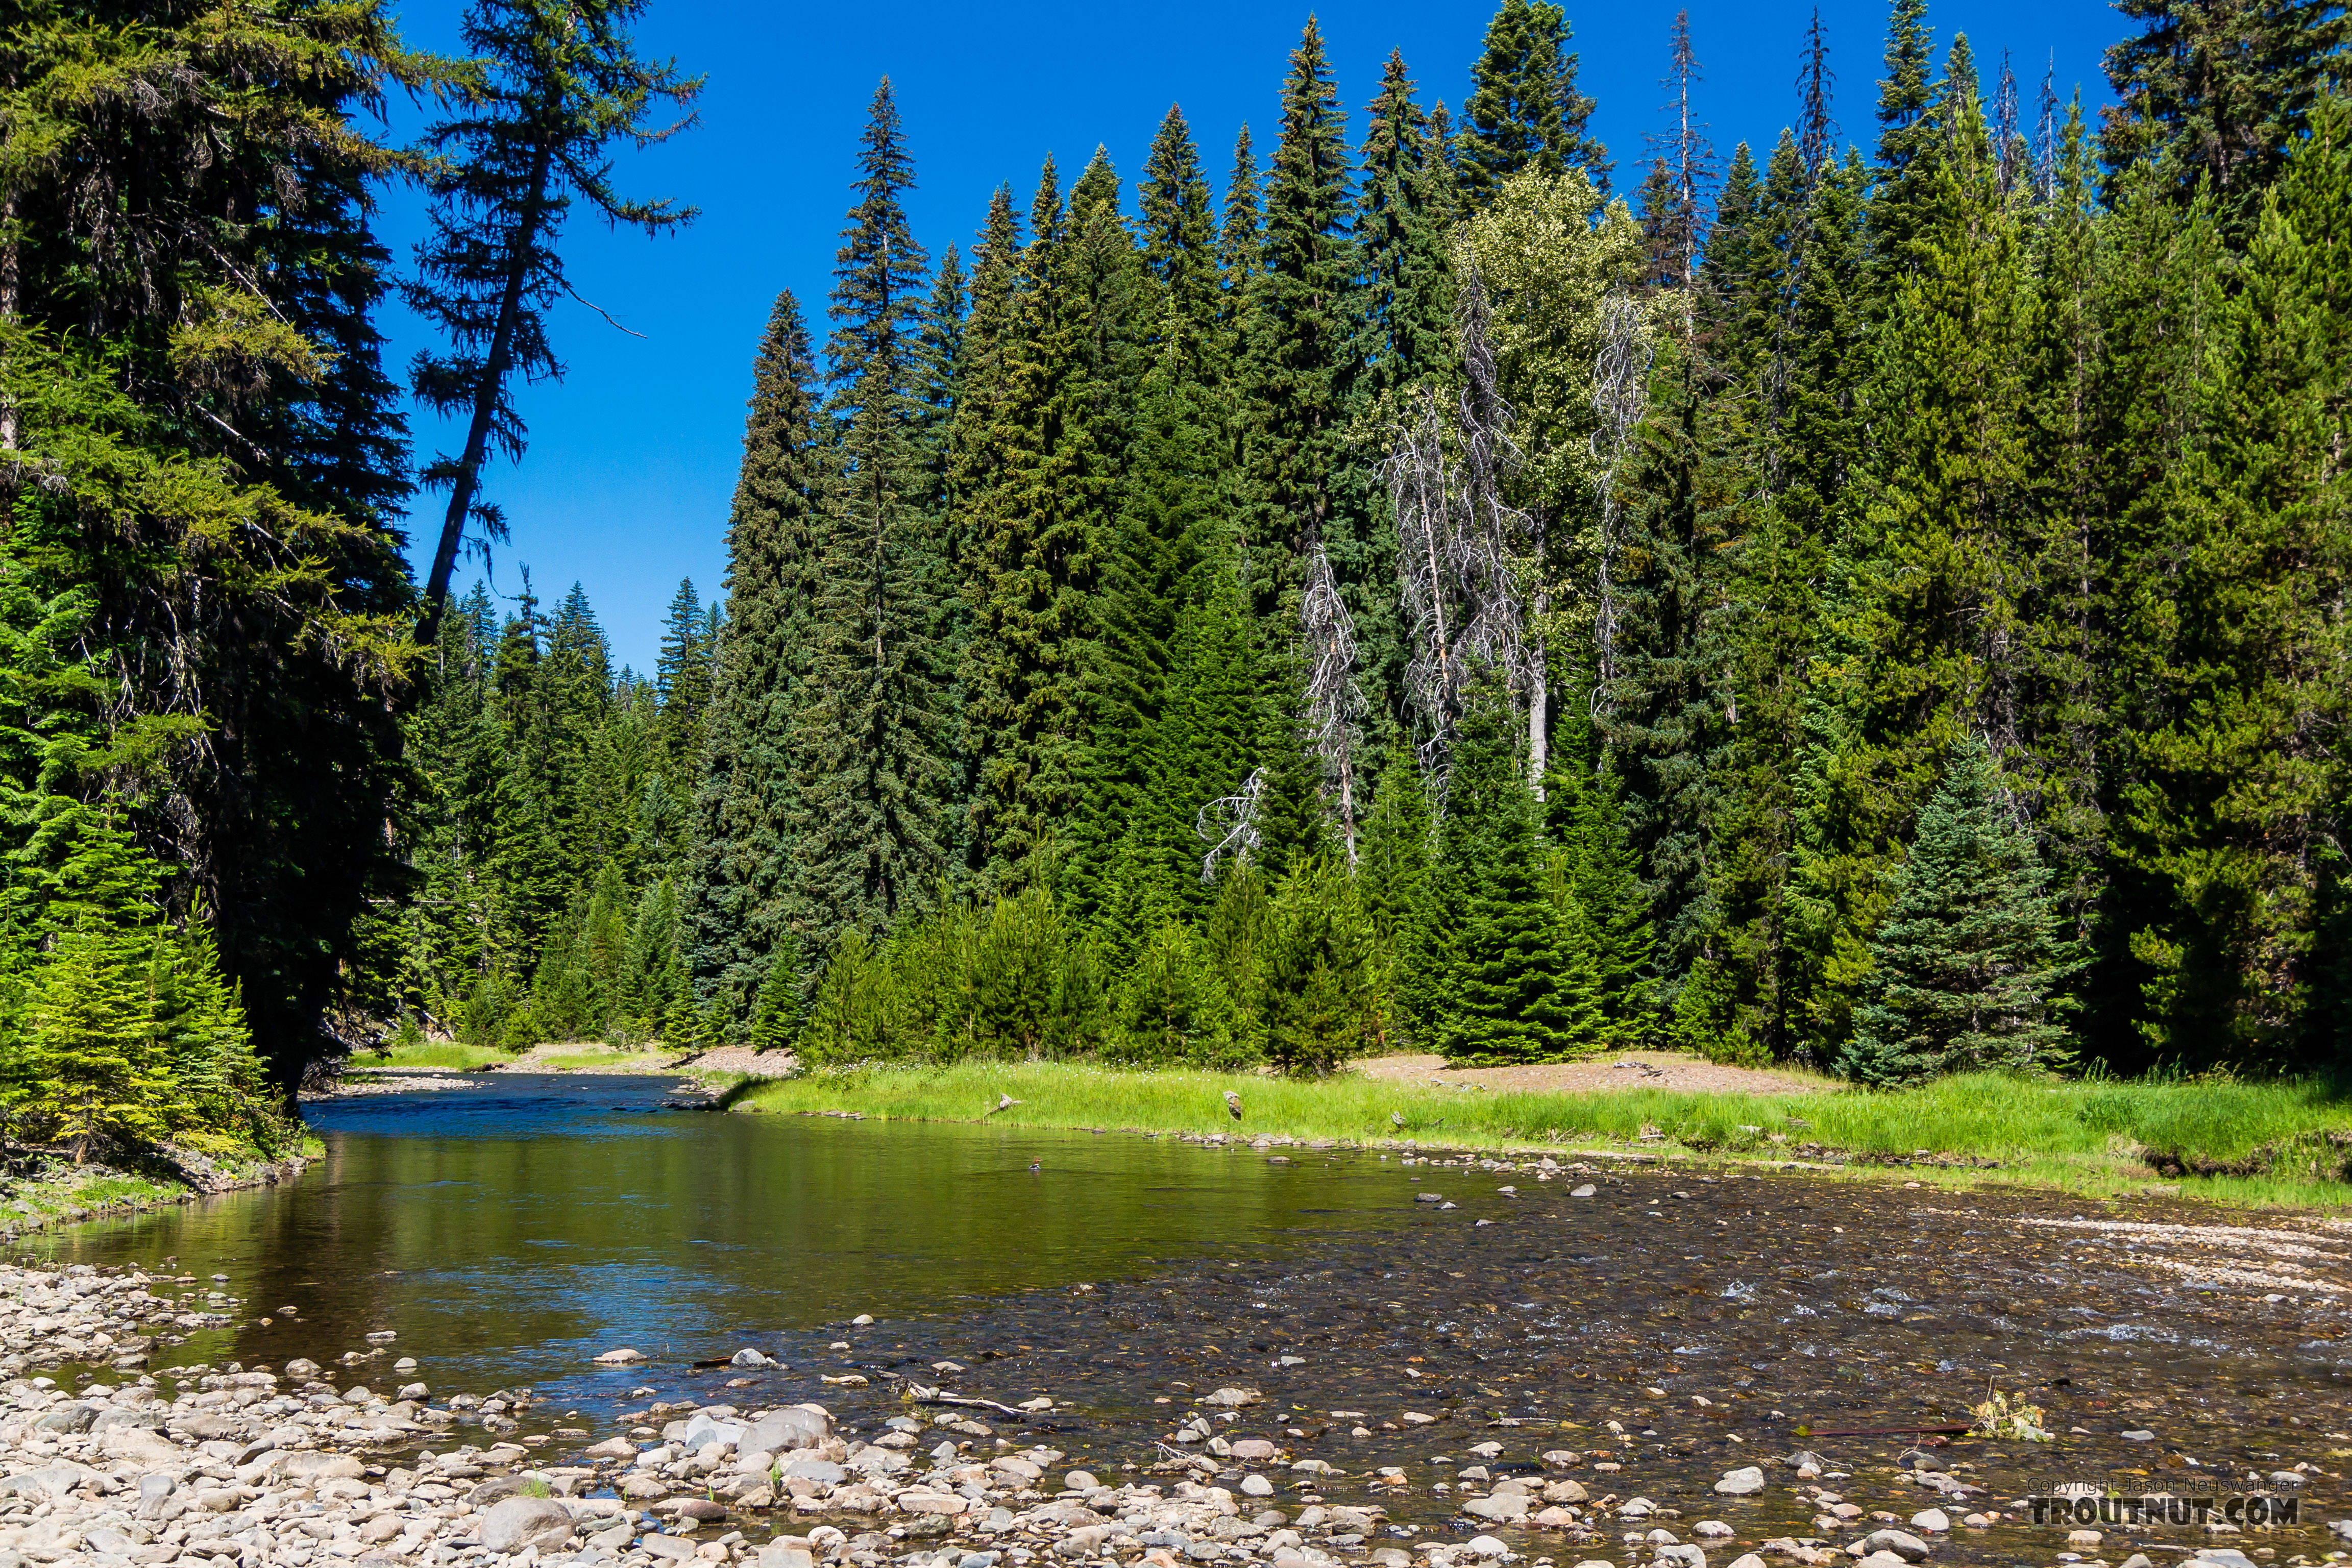  From the Little Naches River in Washington.